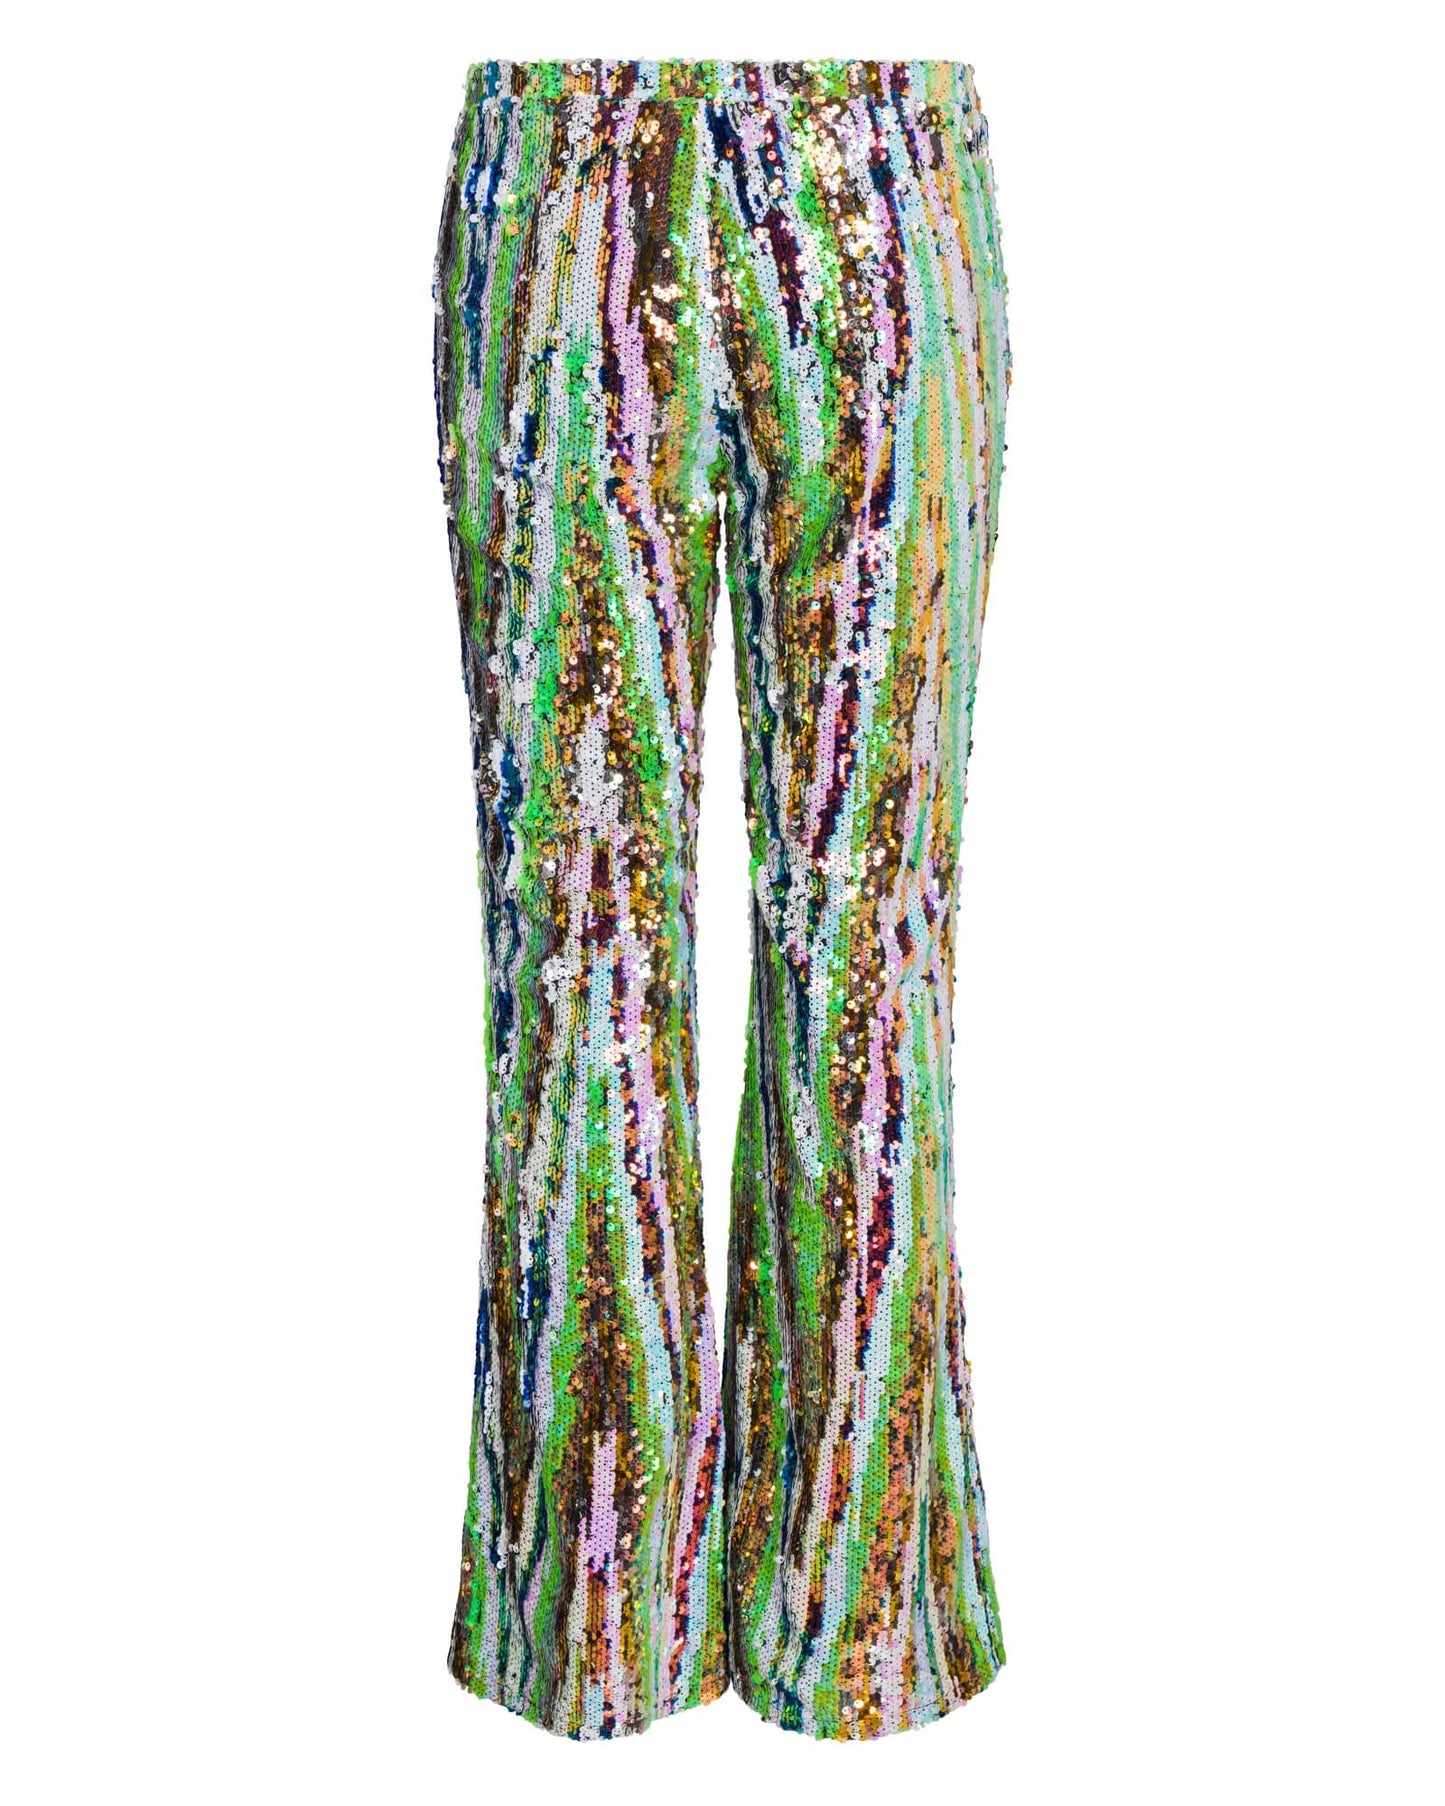 Martini Sequin Pants - Lime Glitter by Meghan Fabulous